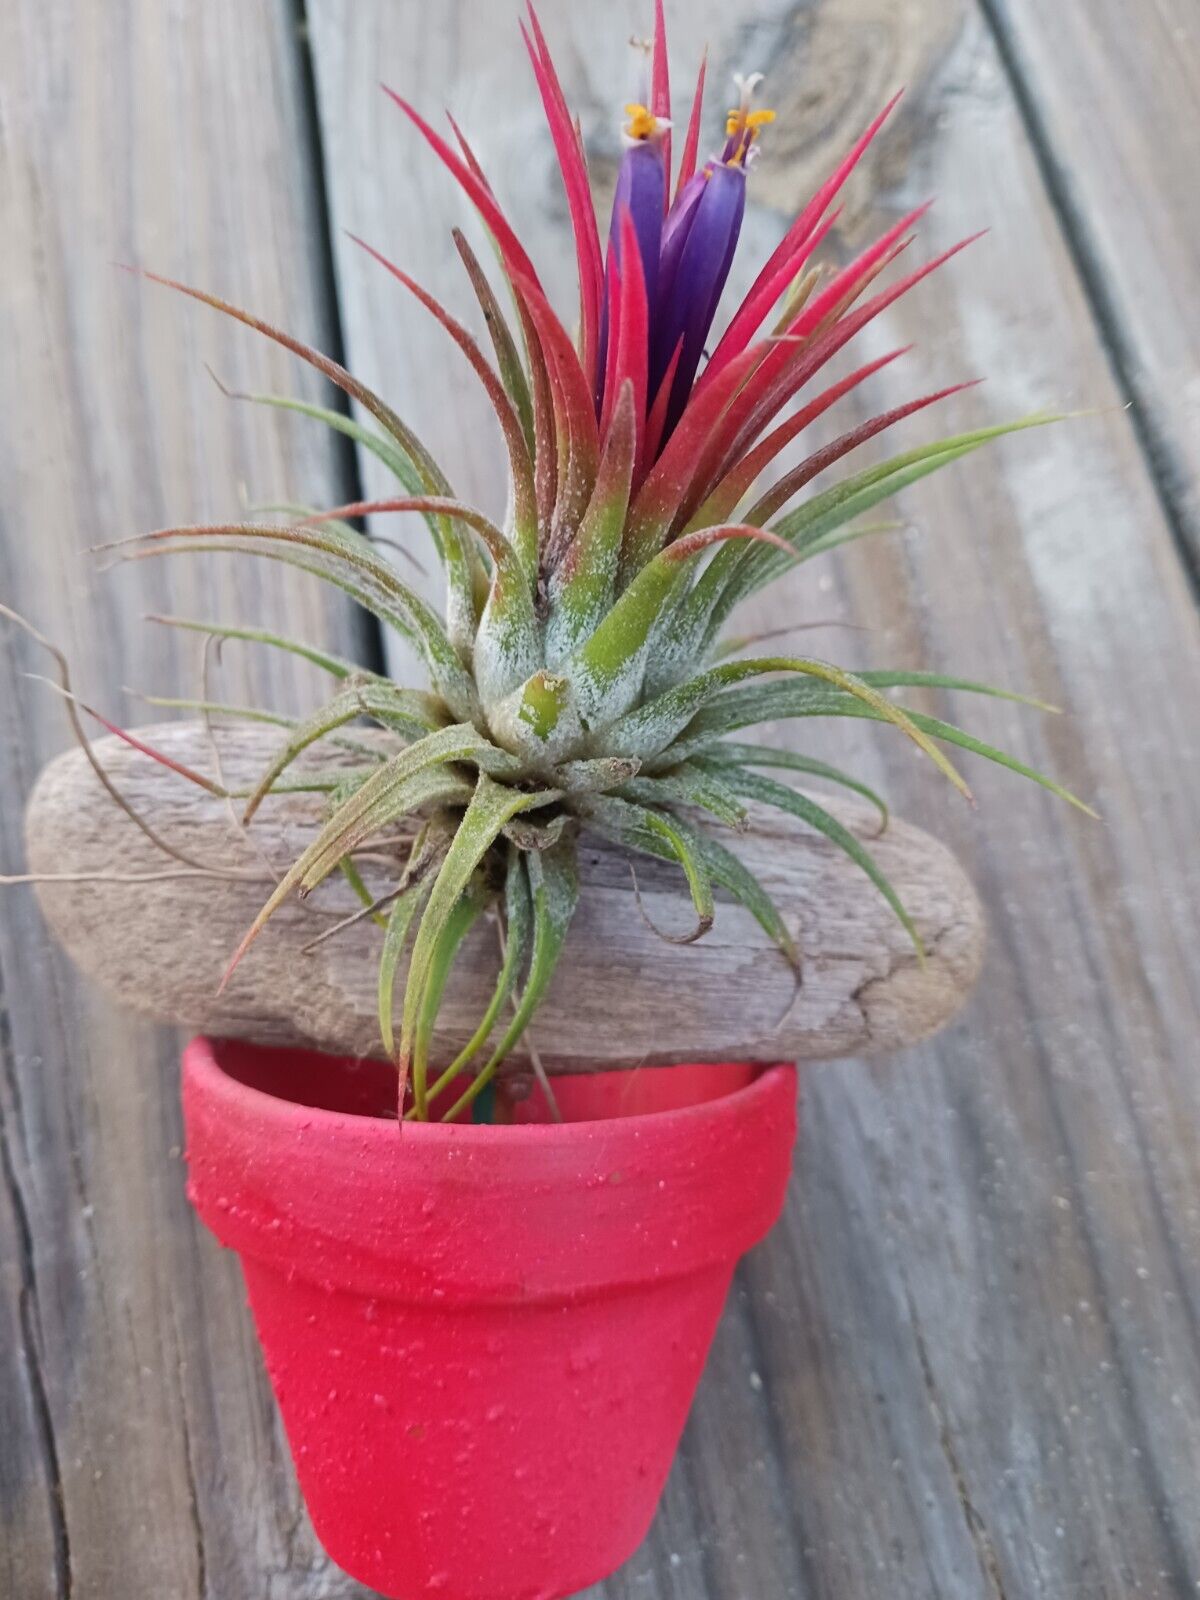 Bromeliad Tillandsia mounted on Driftwood placed in pot Tropical Air Plant